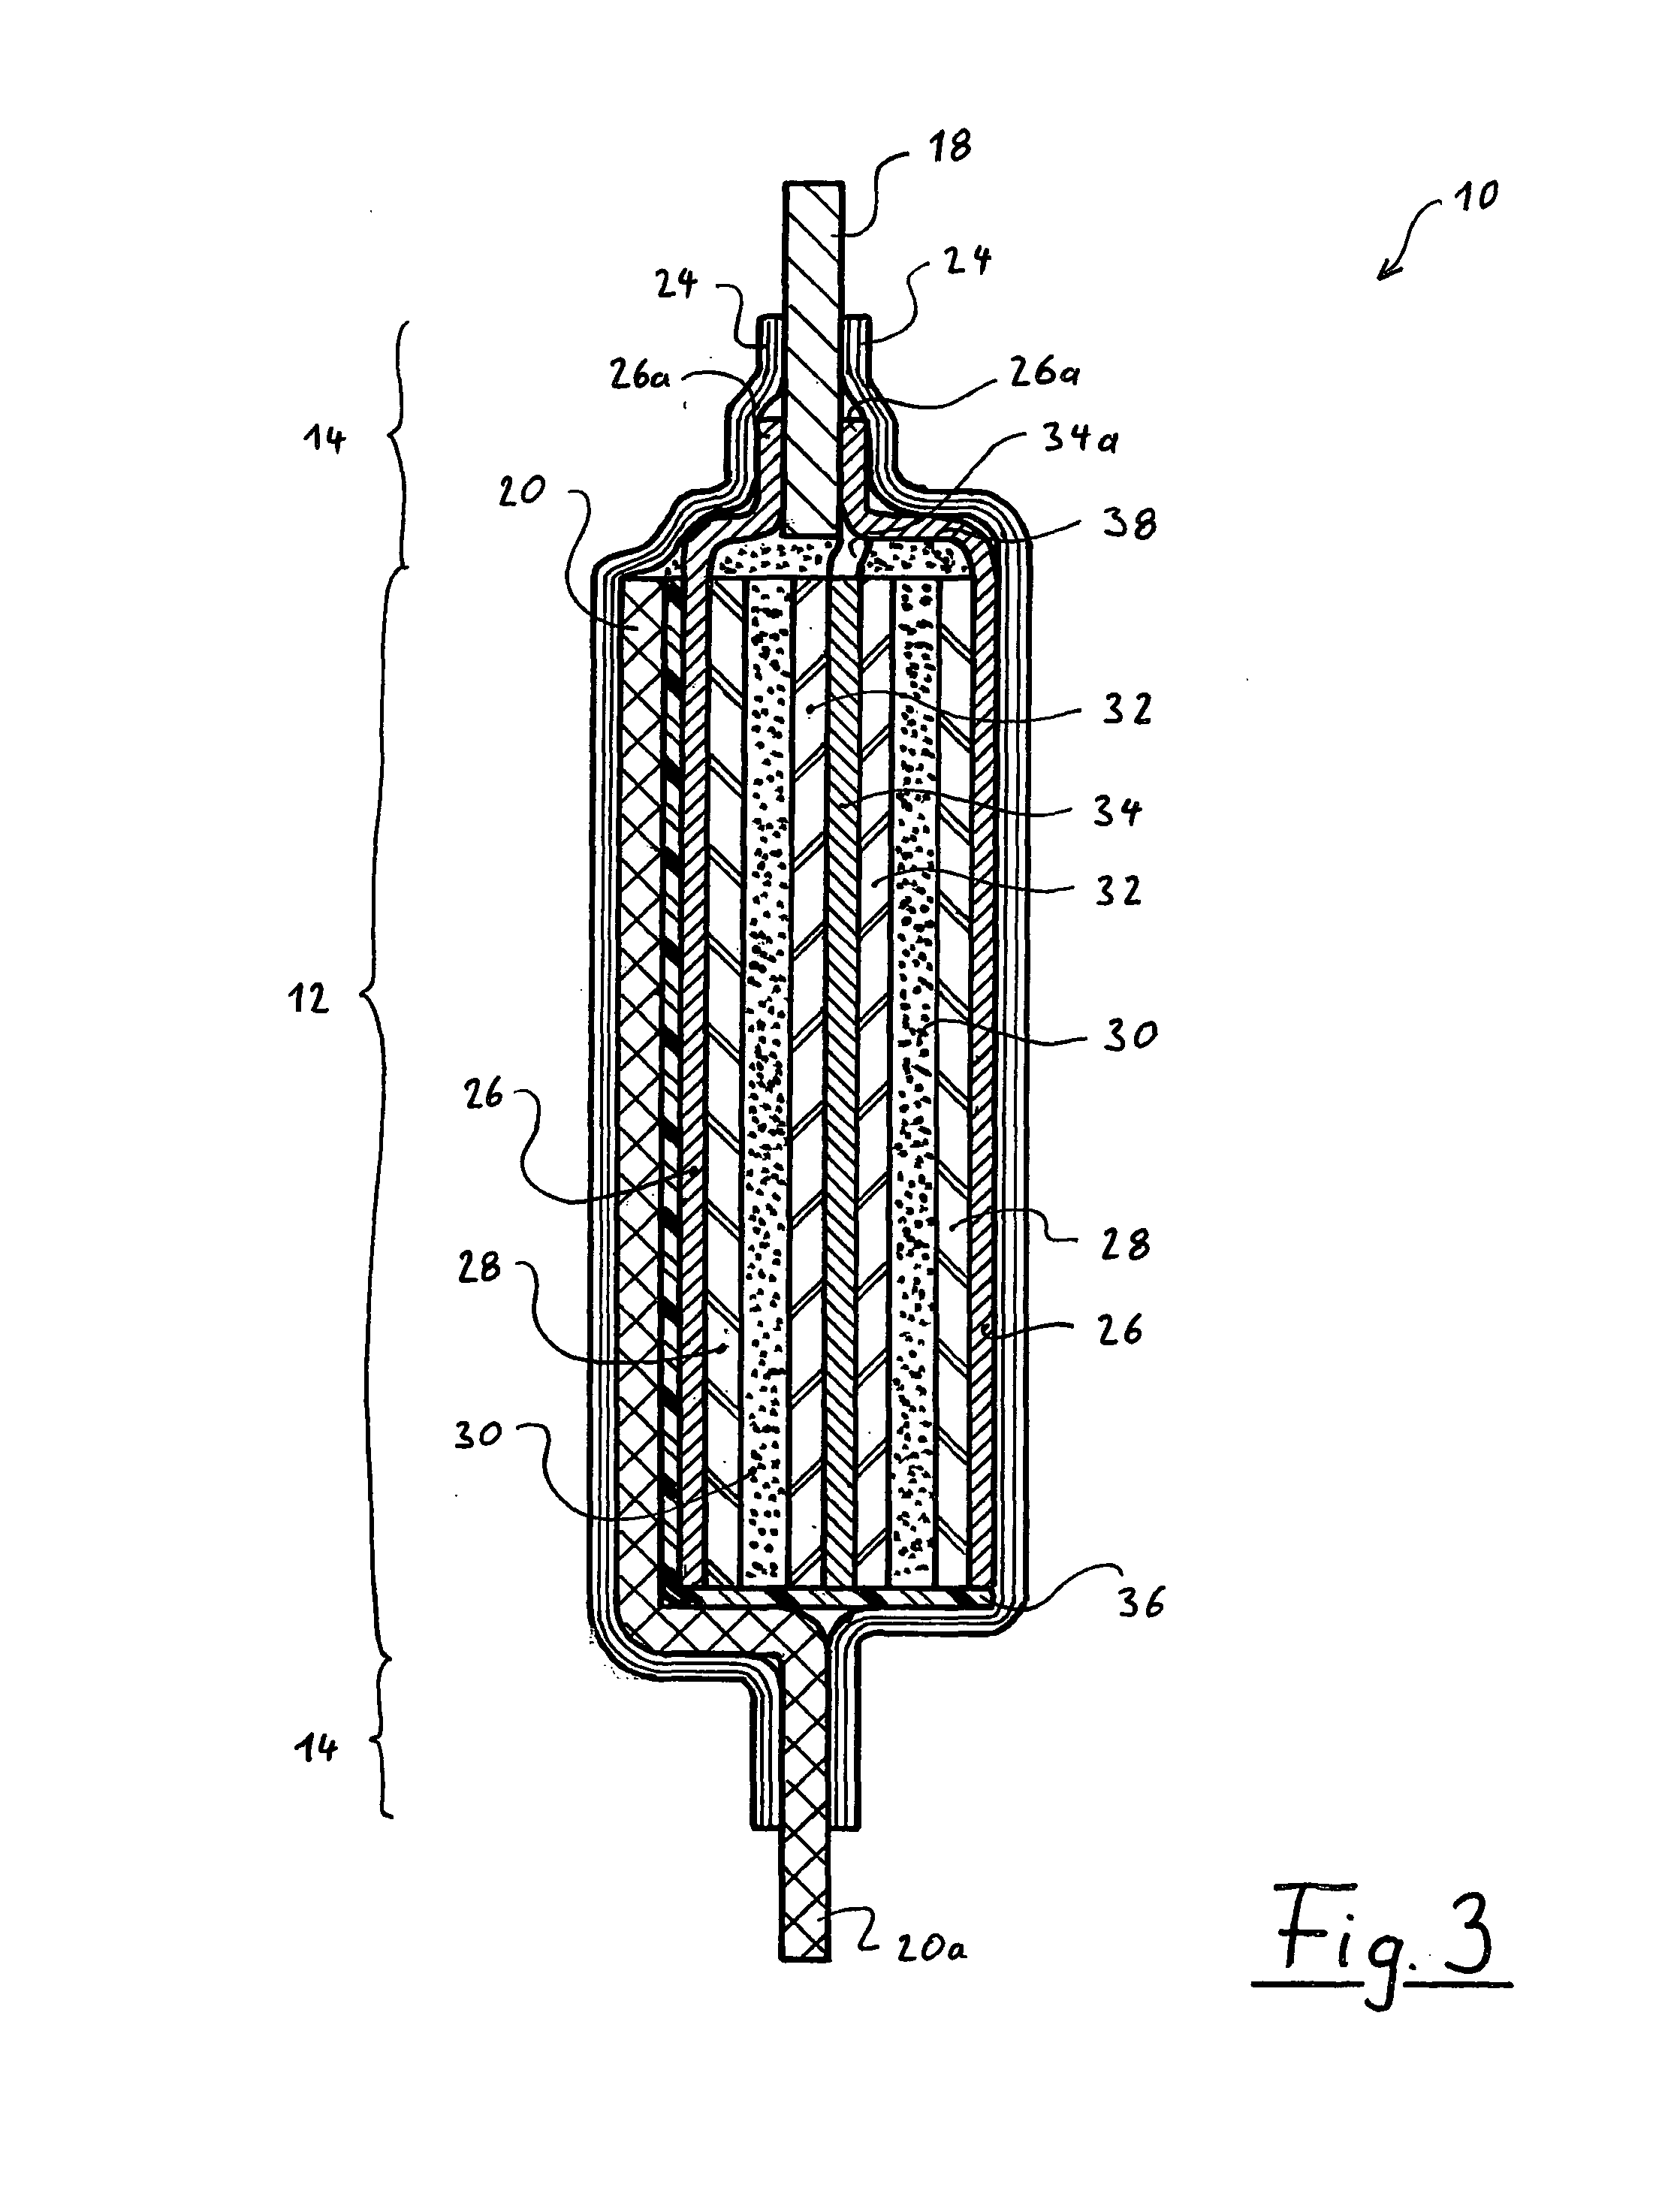 Electrical energy storage cell and apparatus